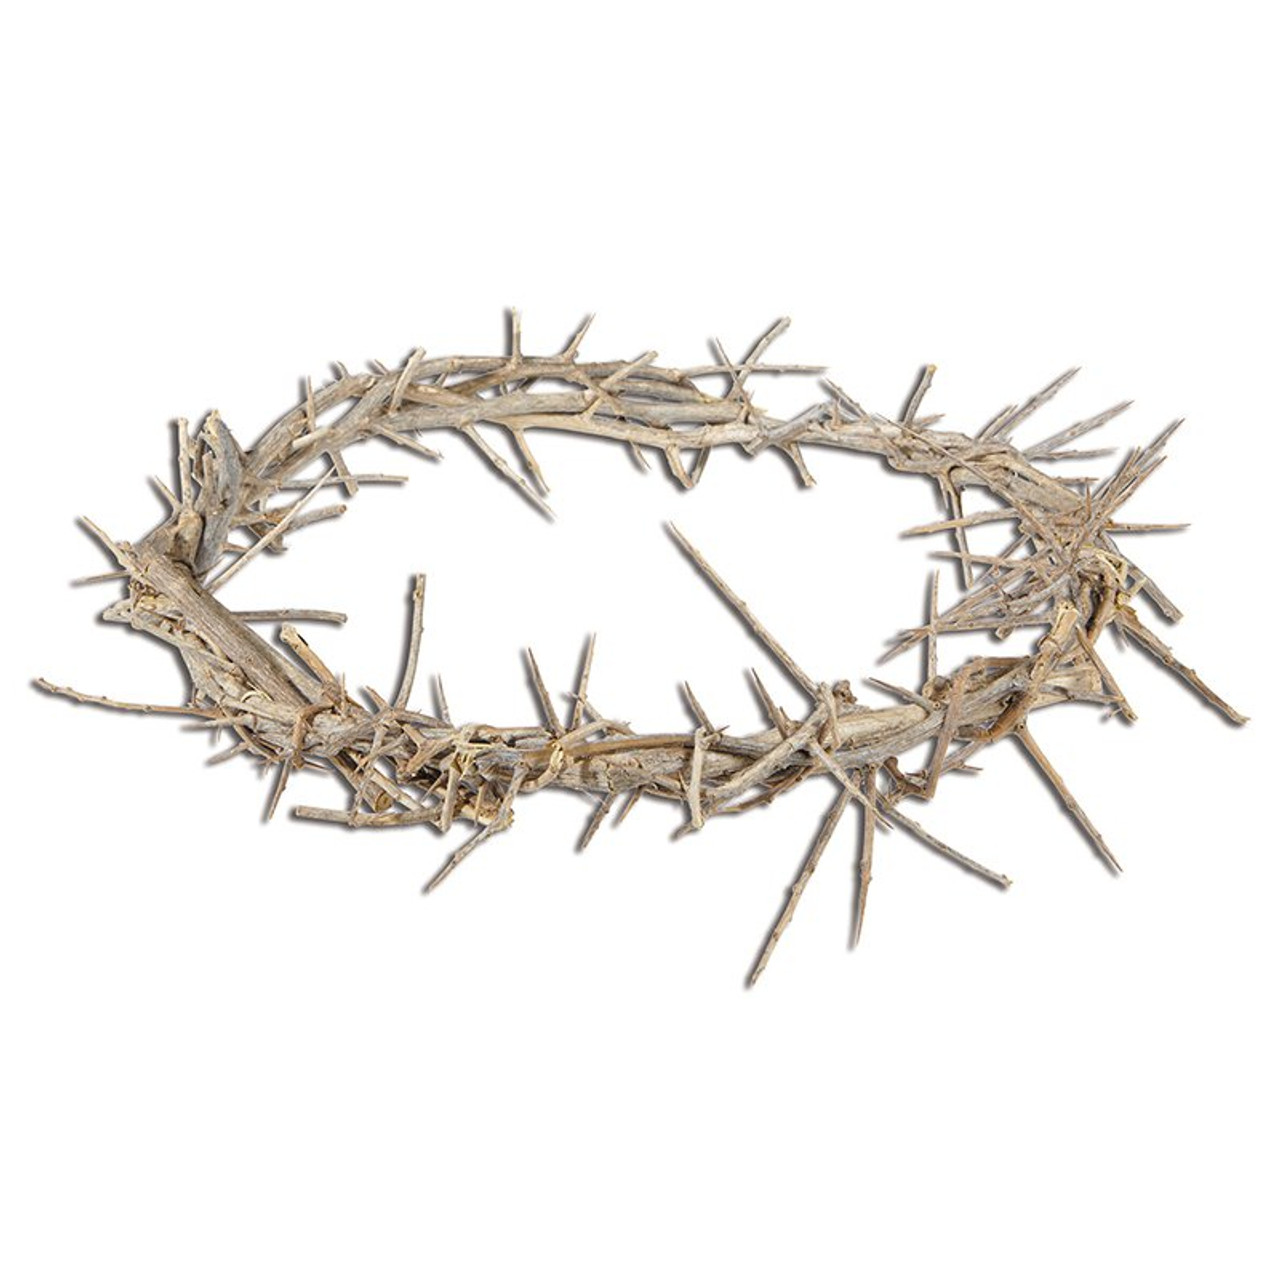 11 Crown of Thorns